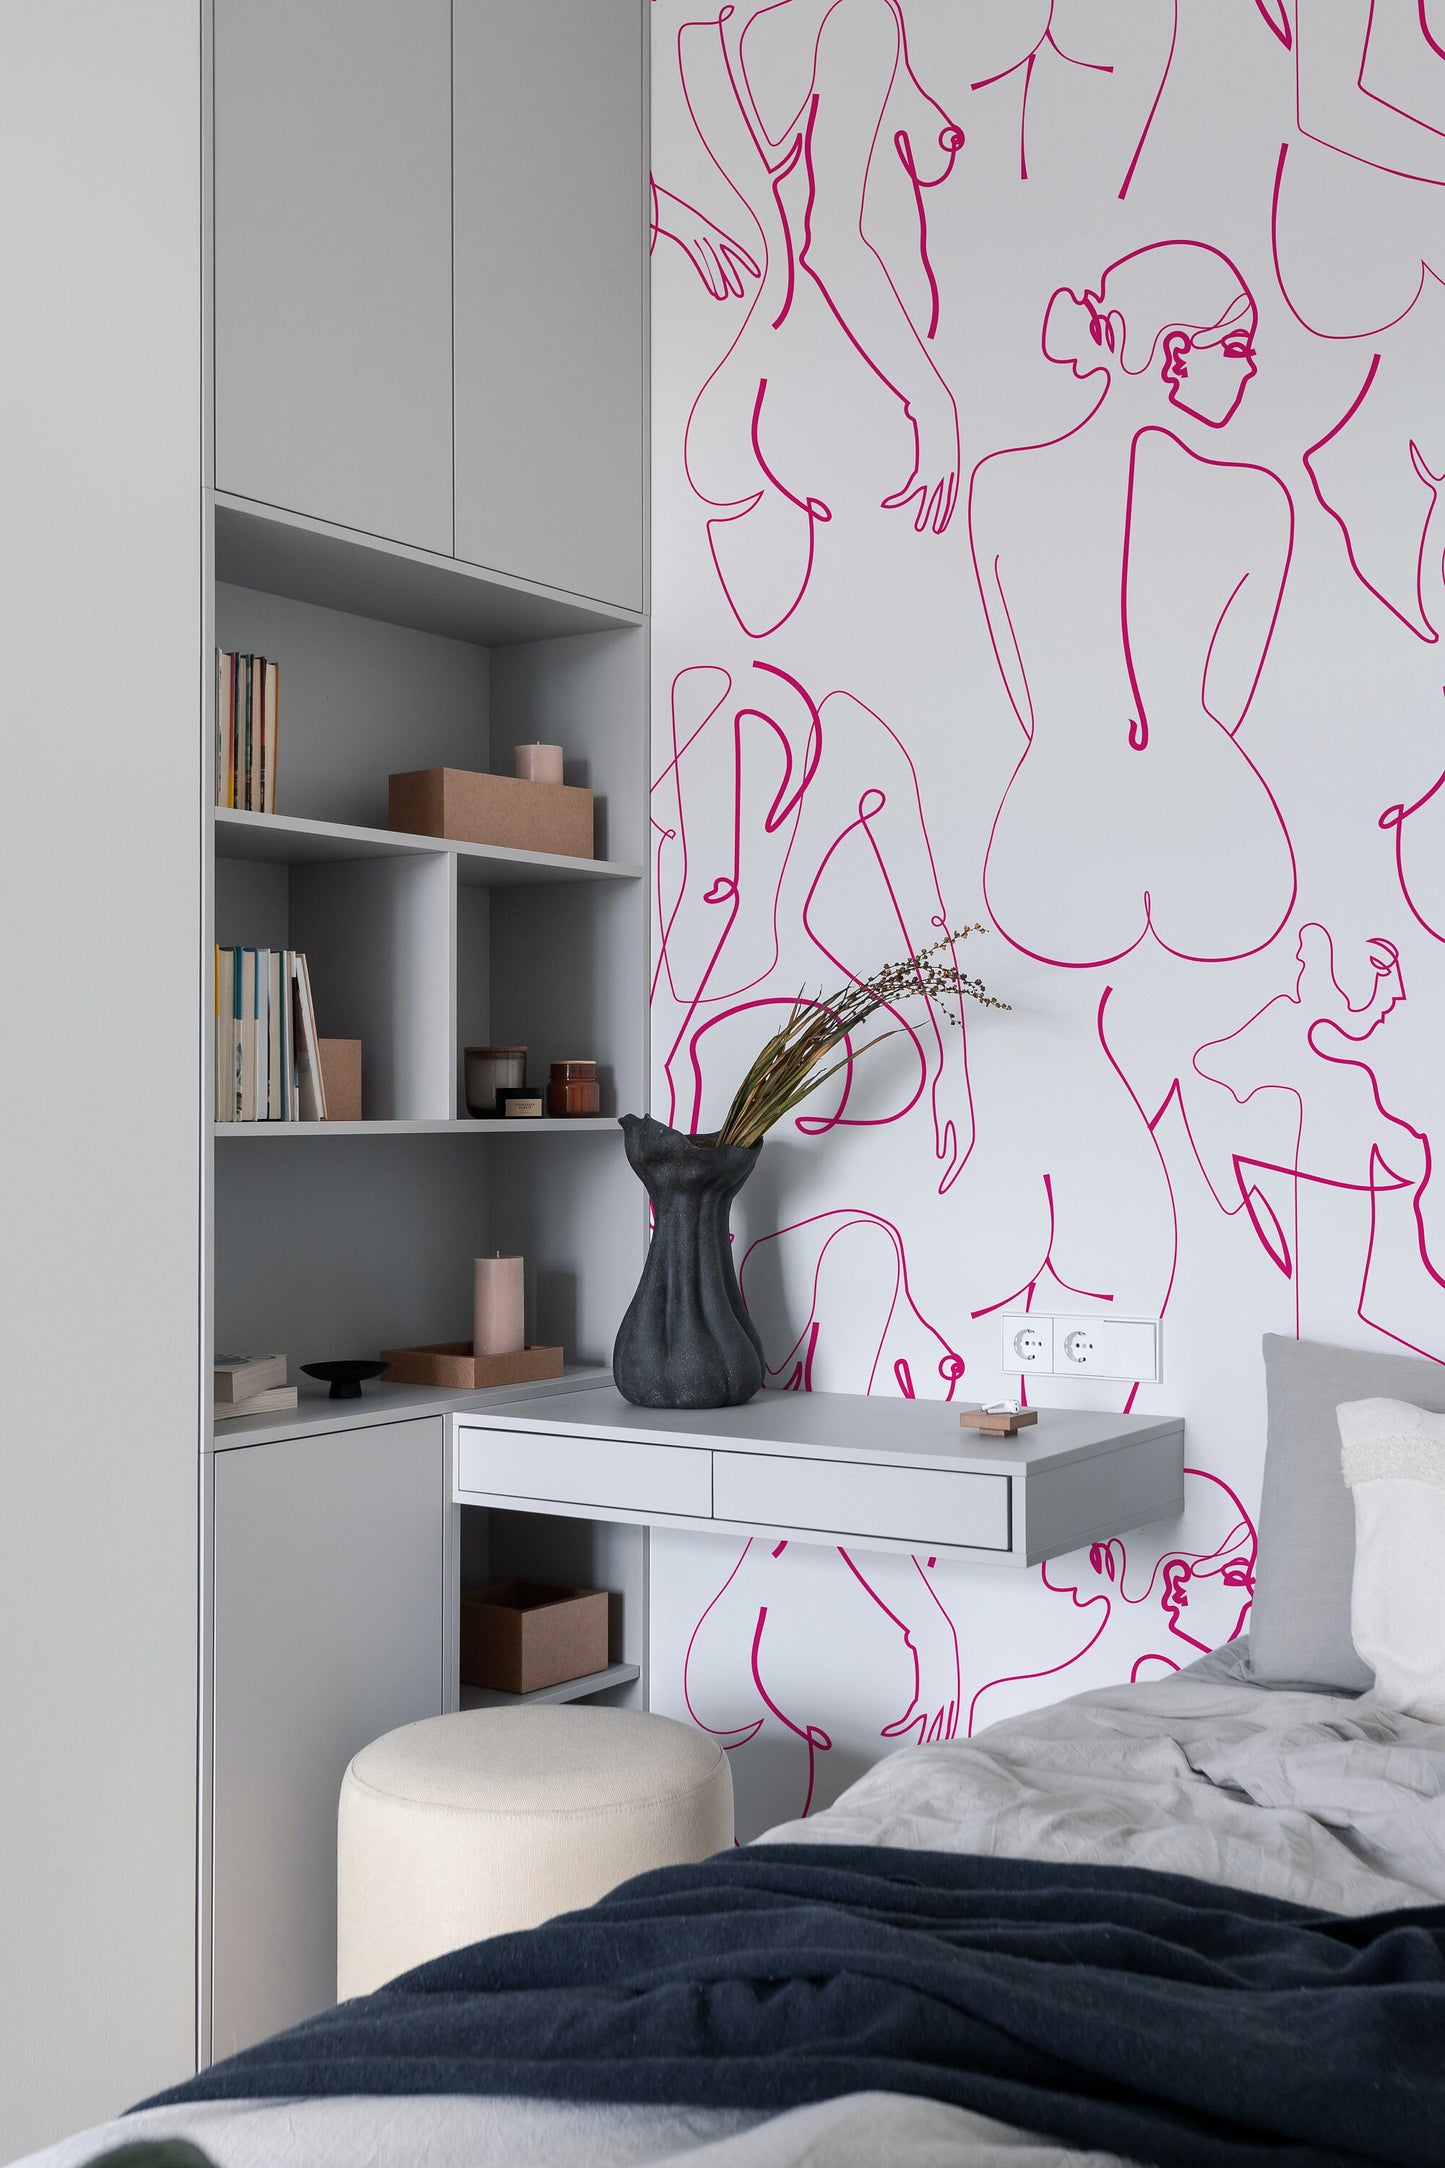 Bright Pink Silhouette Female Body Outline on White Background, Removable Peel and Stick Wallpaper, Self Adhesive Female Accent Wall Decal